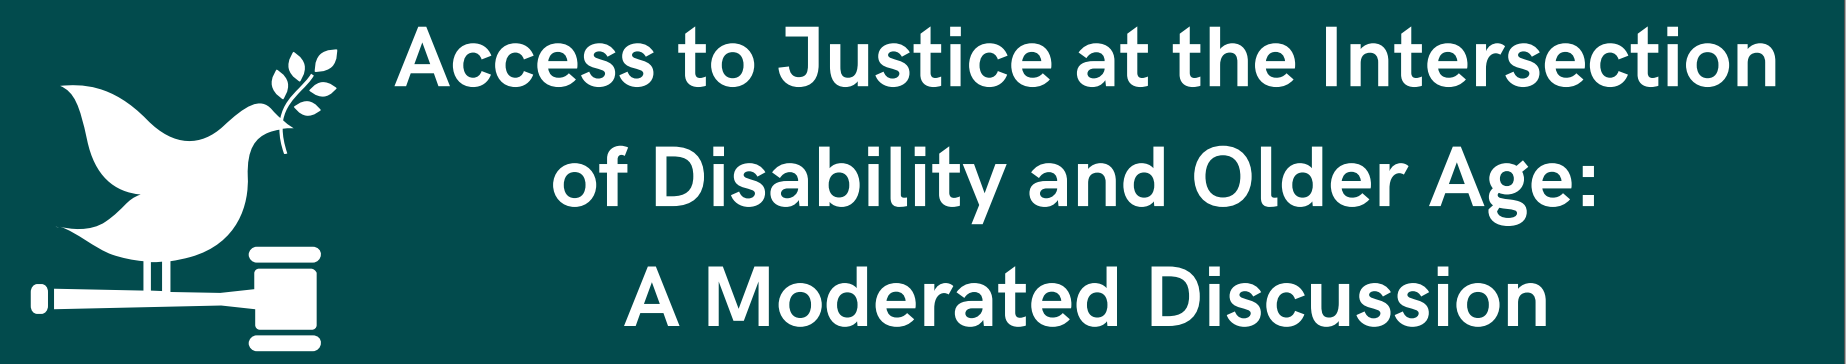 Access_to_Justice-OEWG_Side_Event-Mar21-Flyer-header